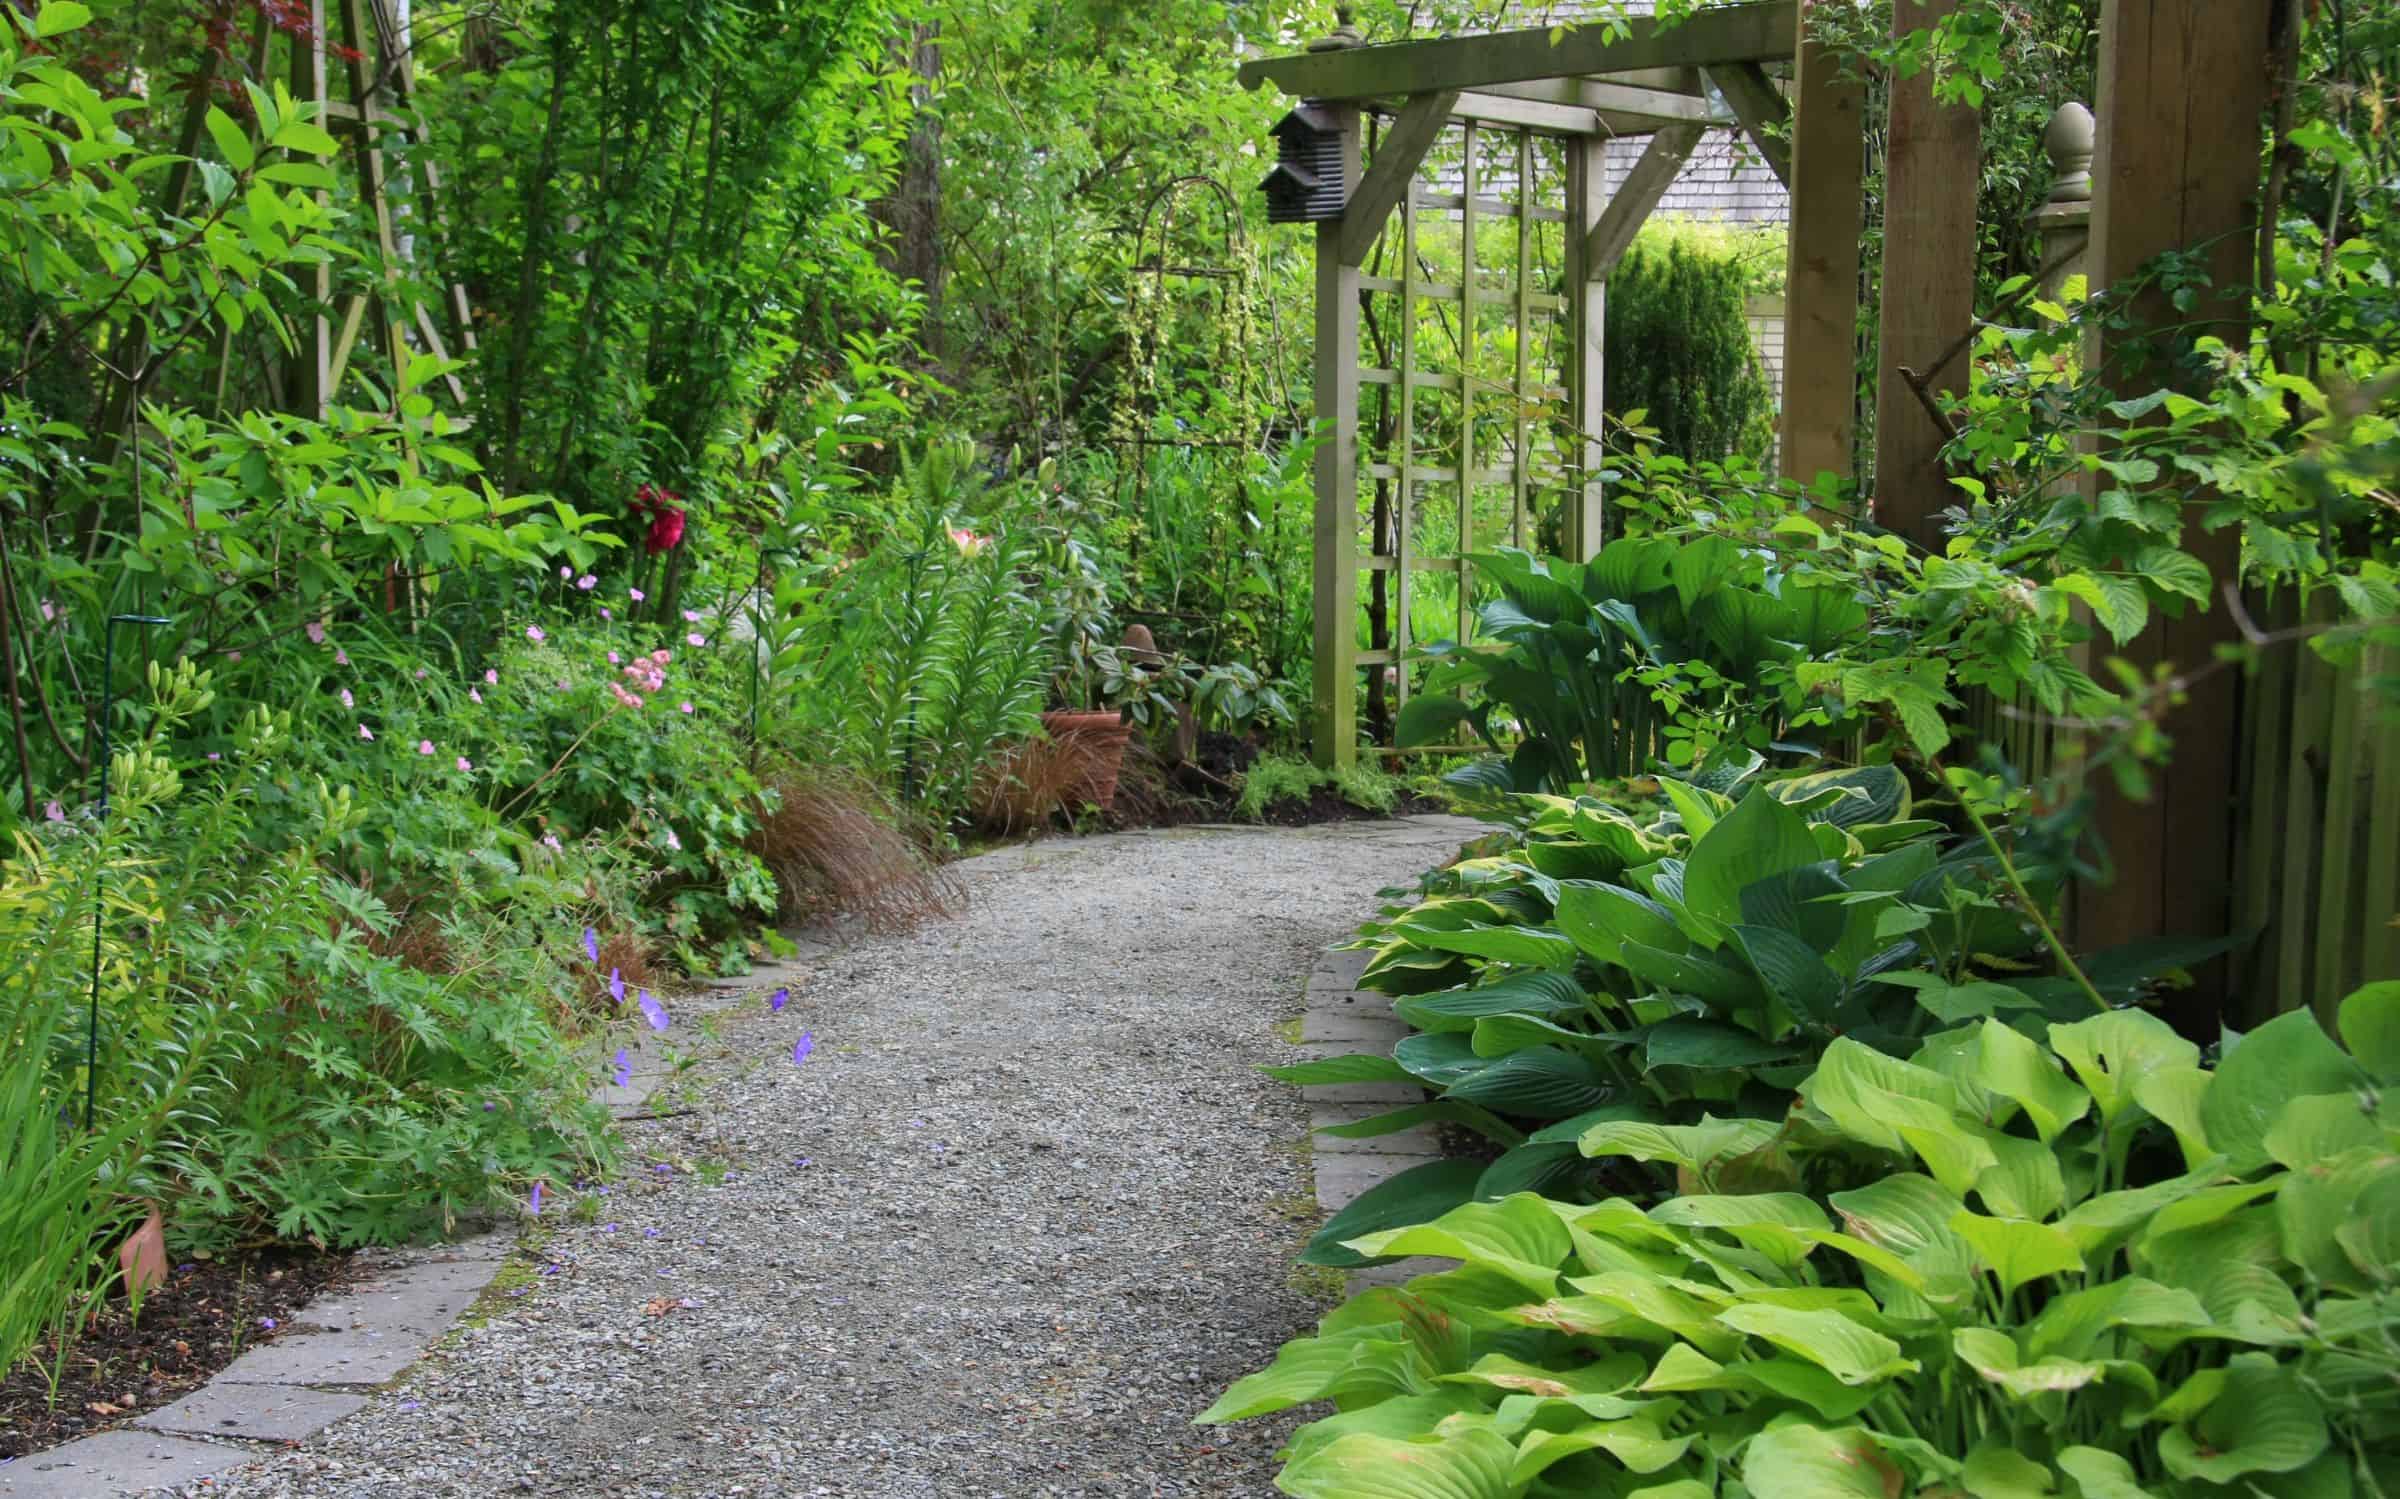 Hostas and other plants growing along a gravel pathway